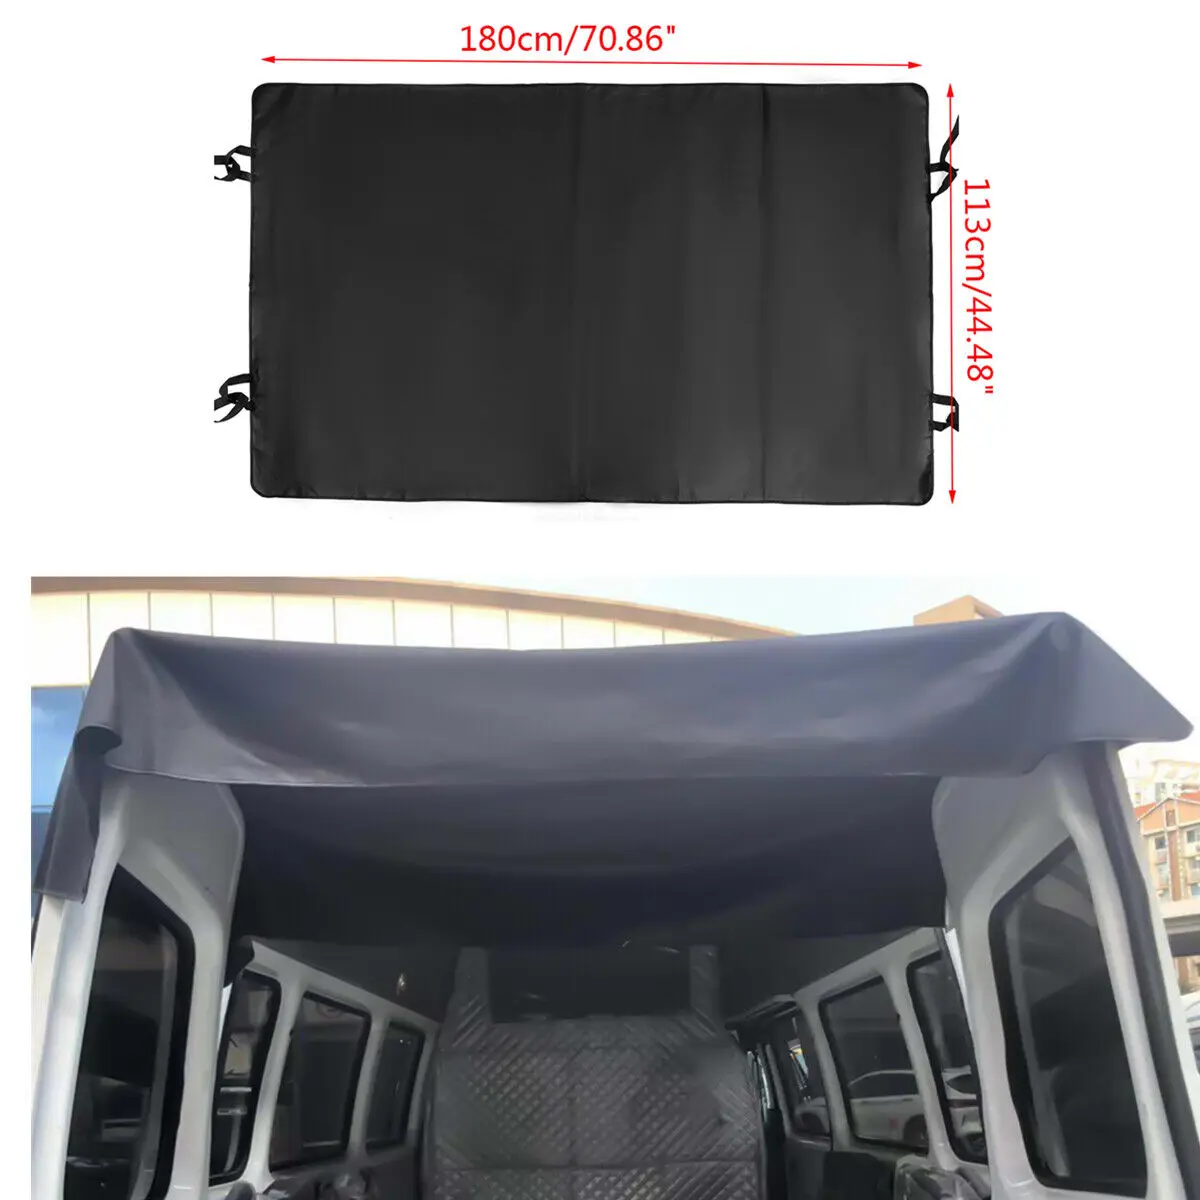 REAR BARN DOOR AWNING COVER Fit Ford Transit，Ram Promaster，VW Crafter，Iveco